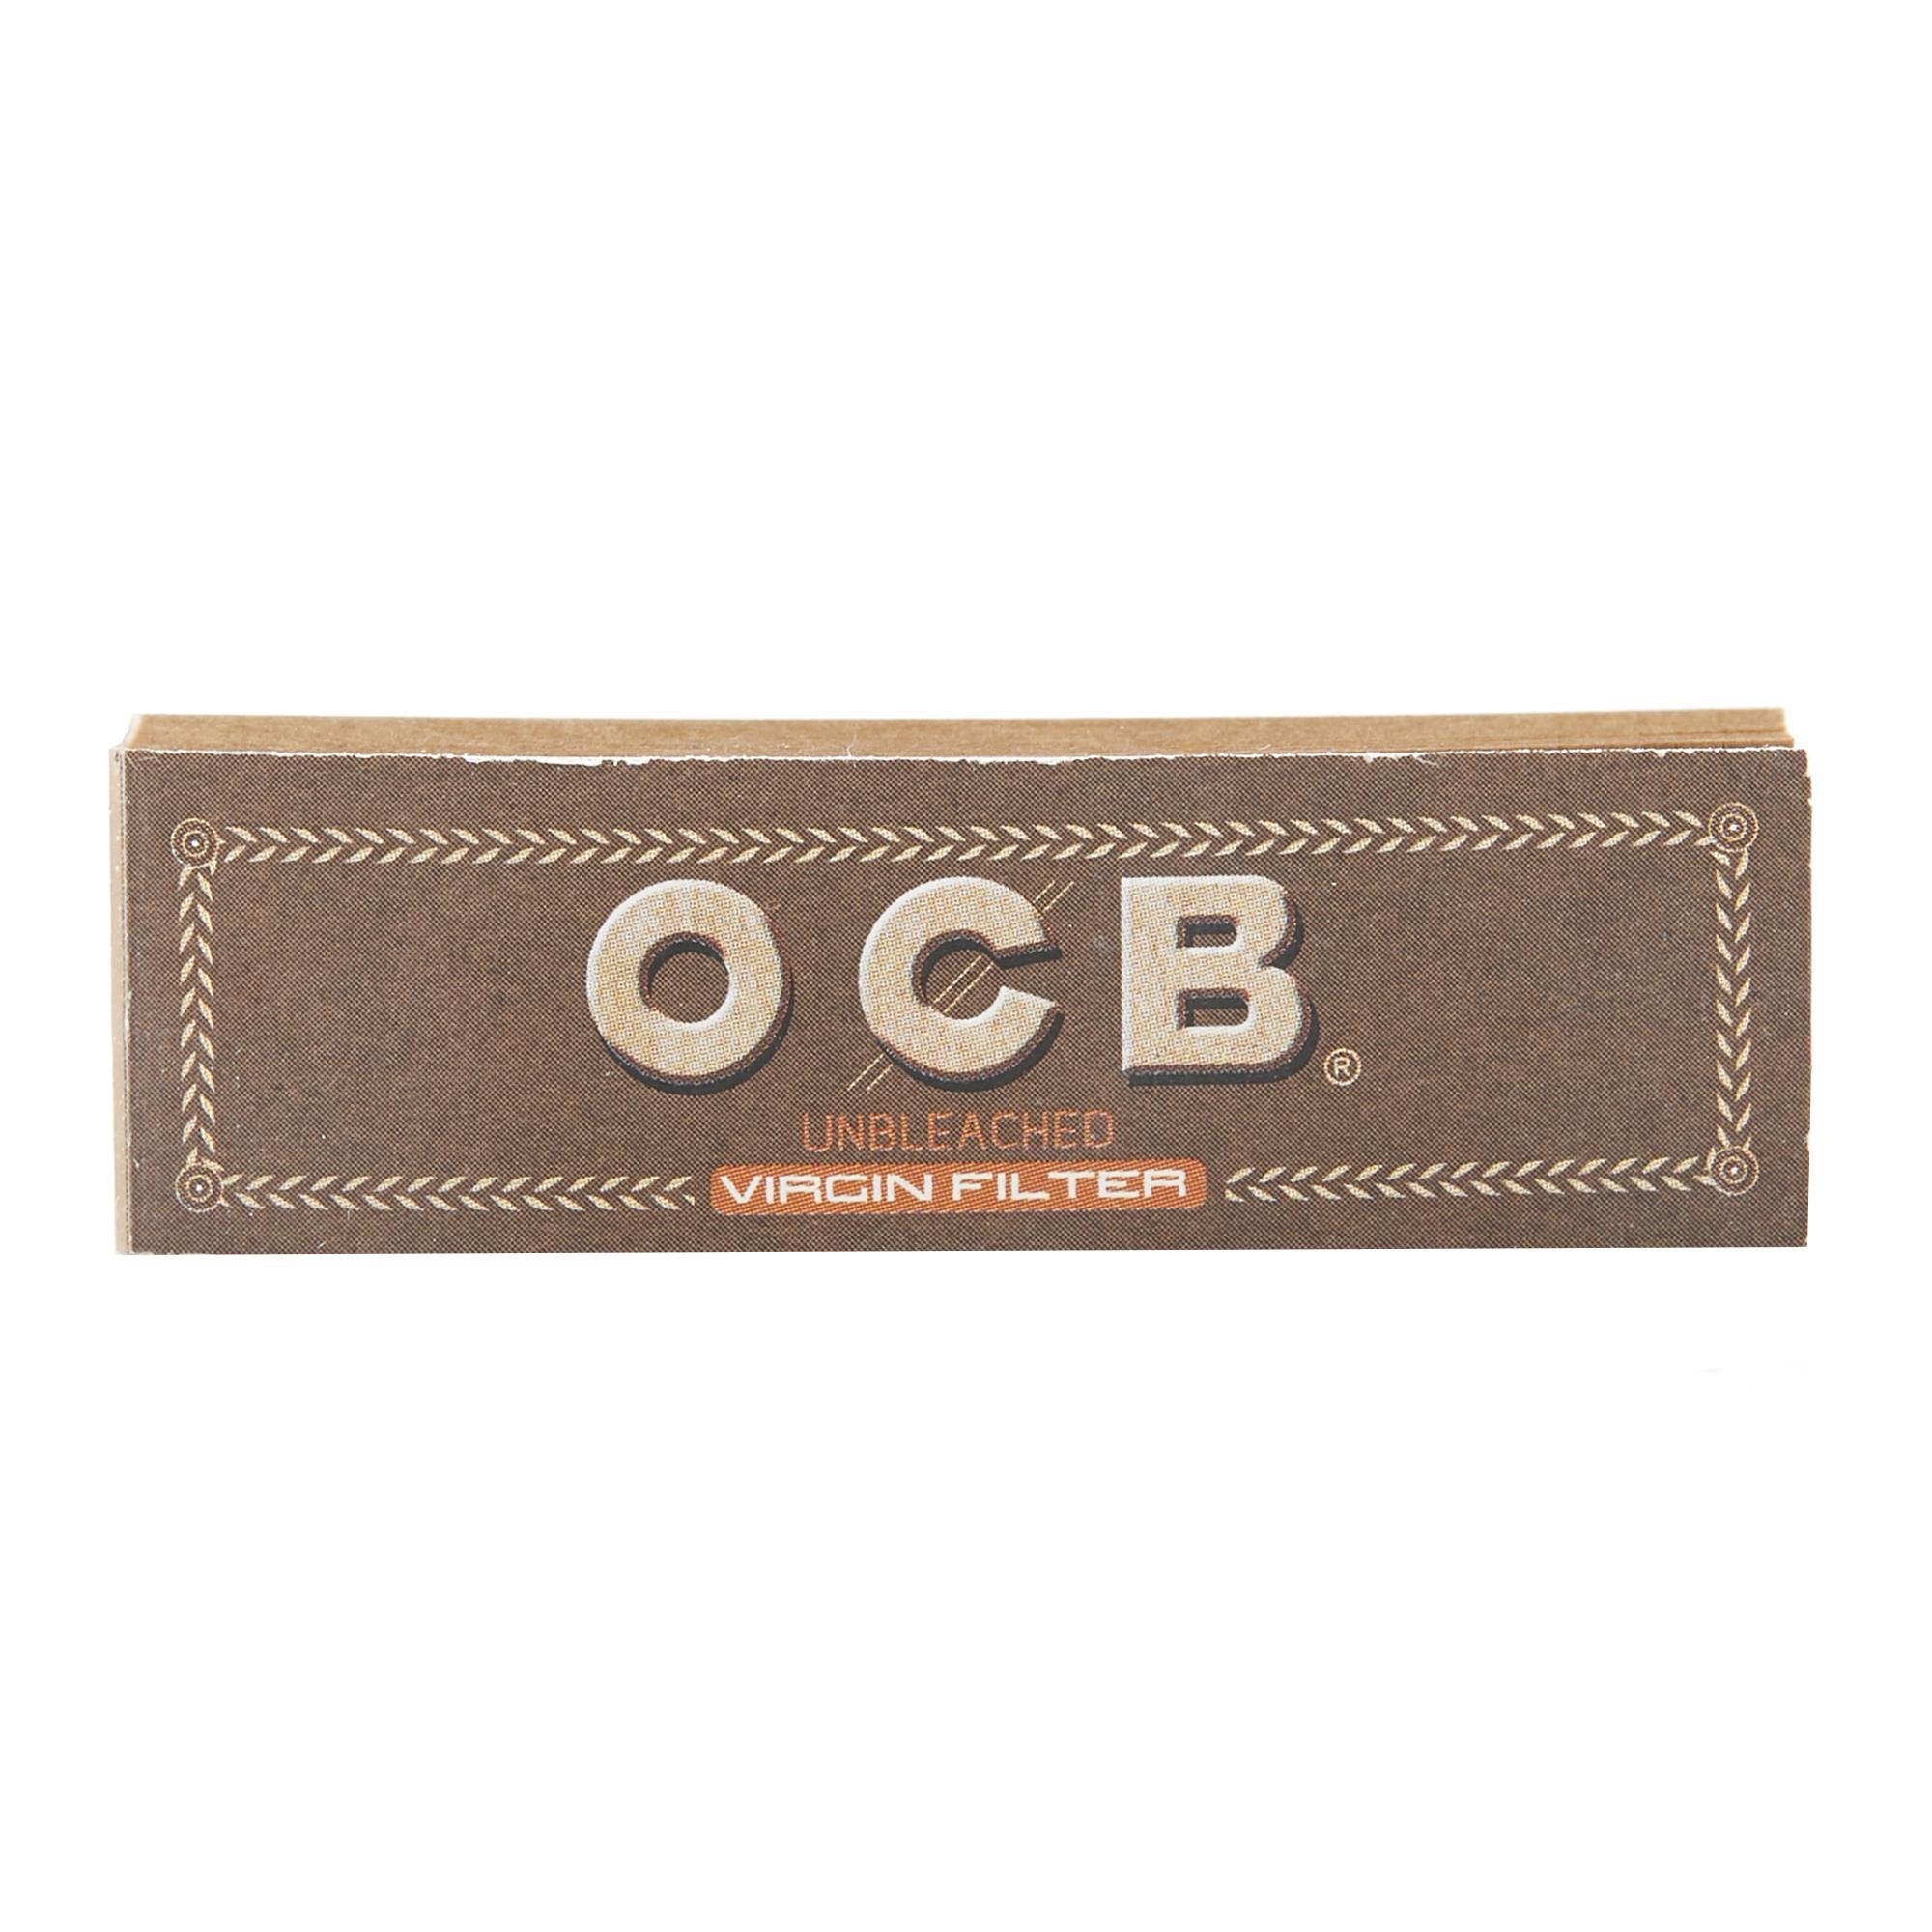 OCB VIRGIN UNBLEACHED PERFORATED TIPS